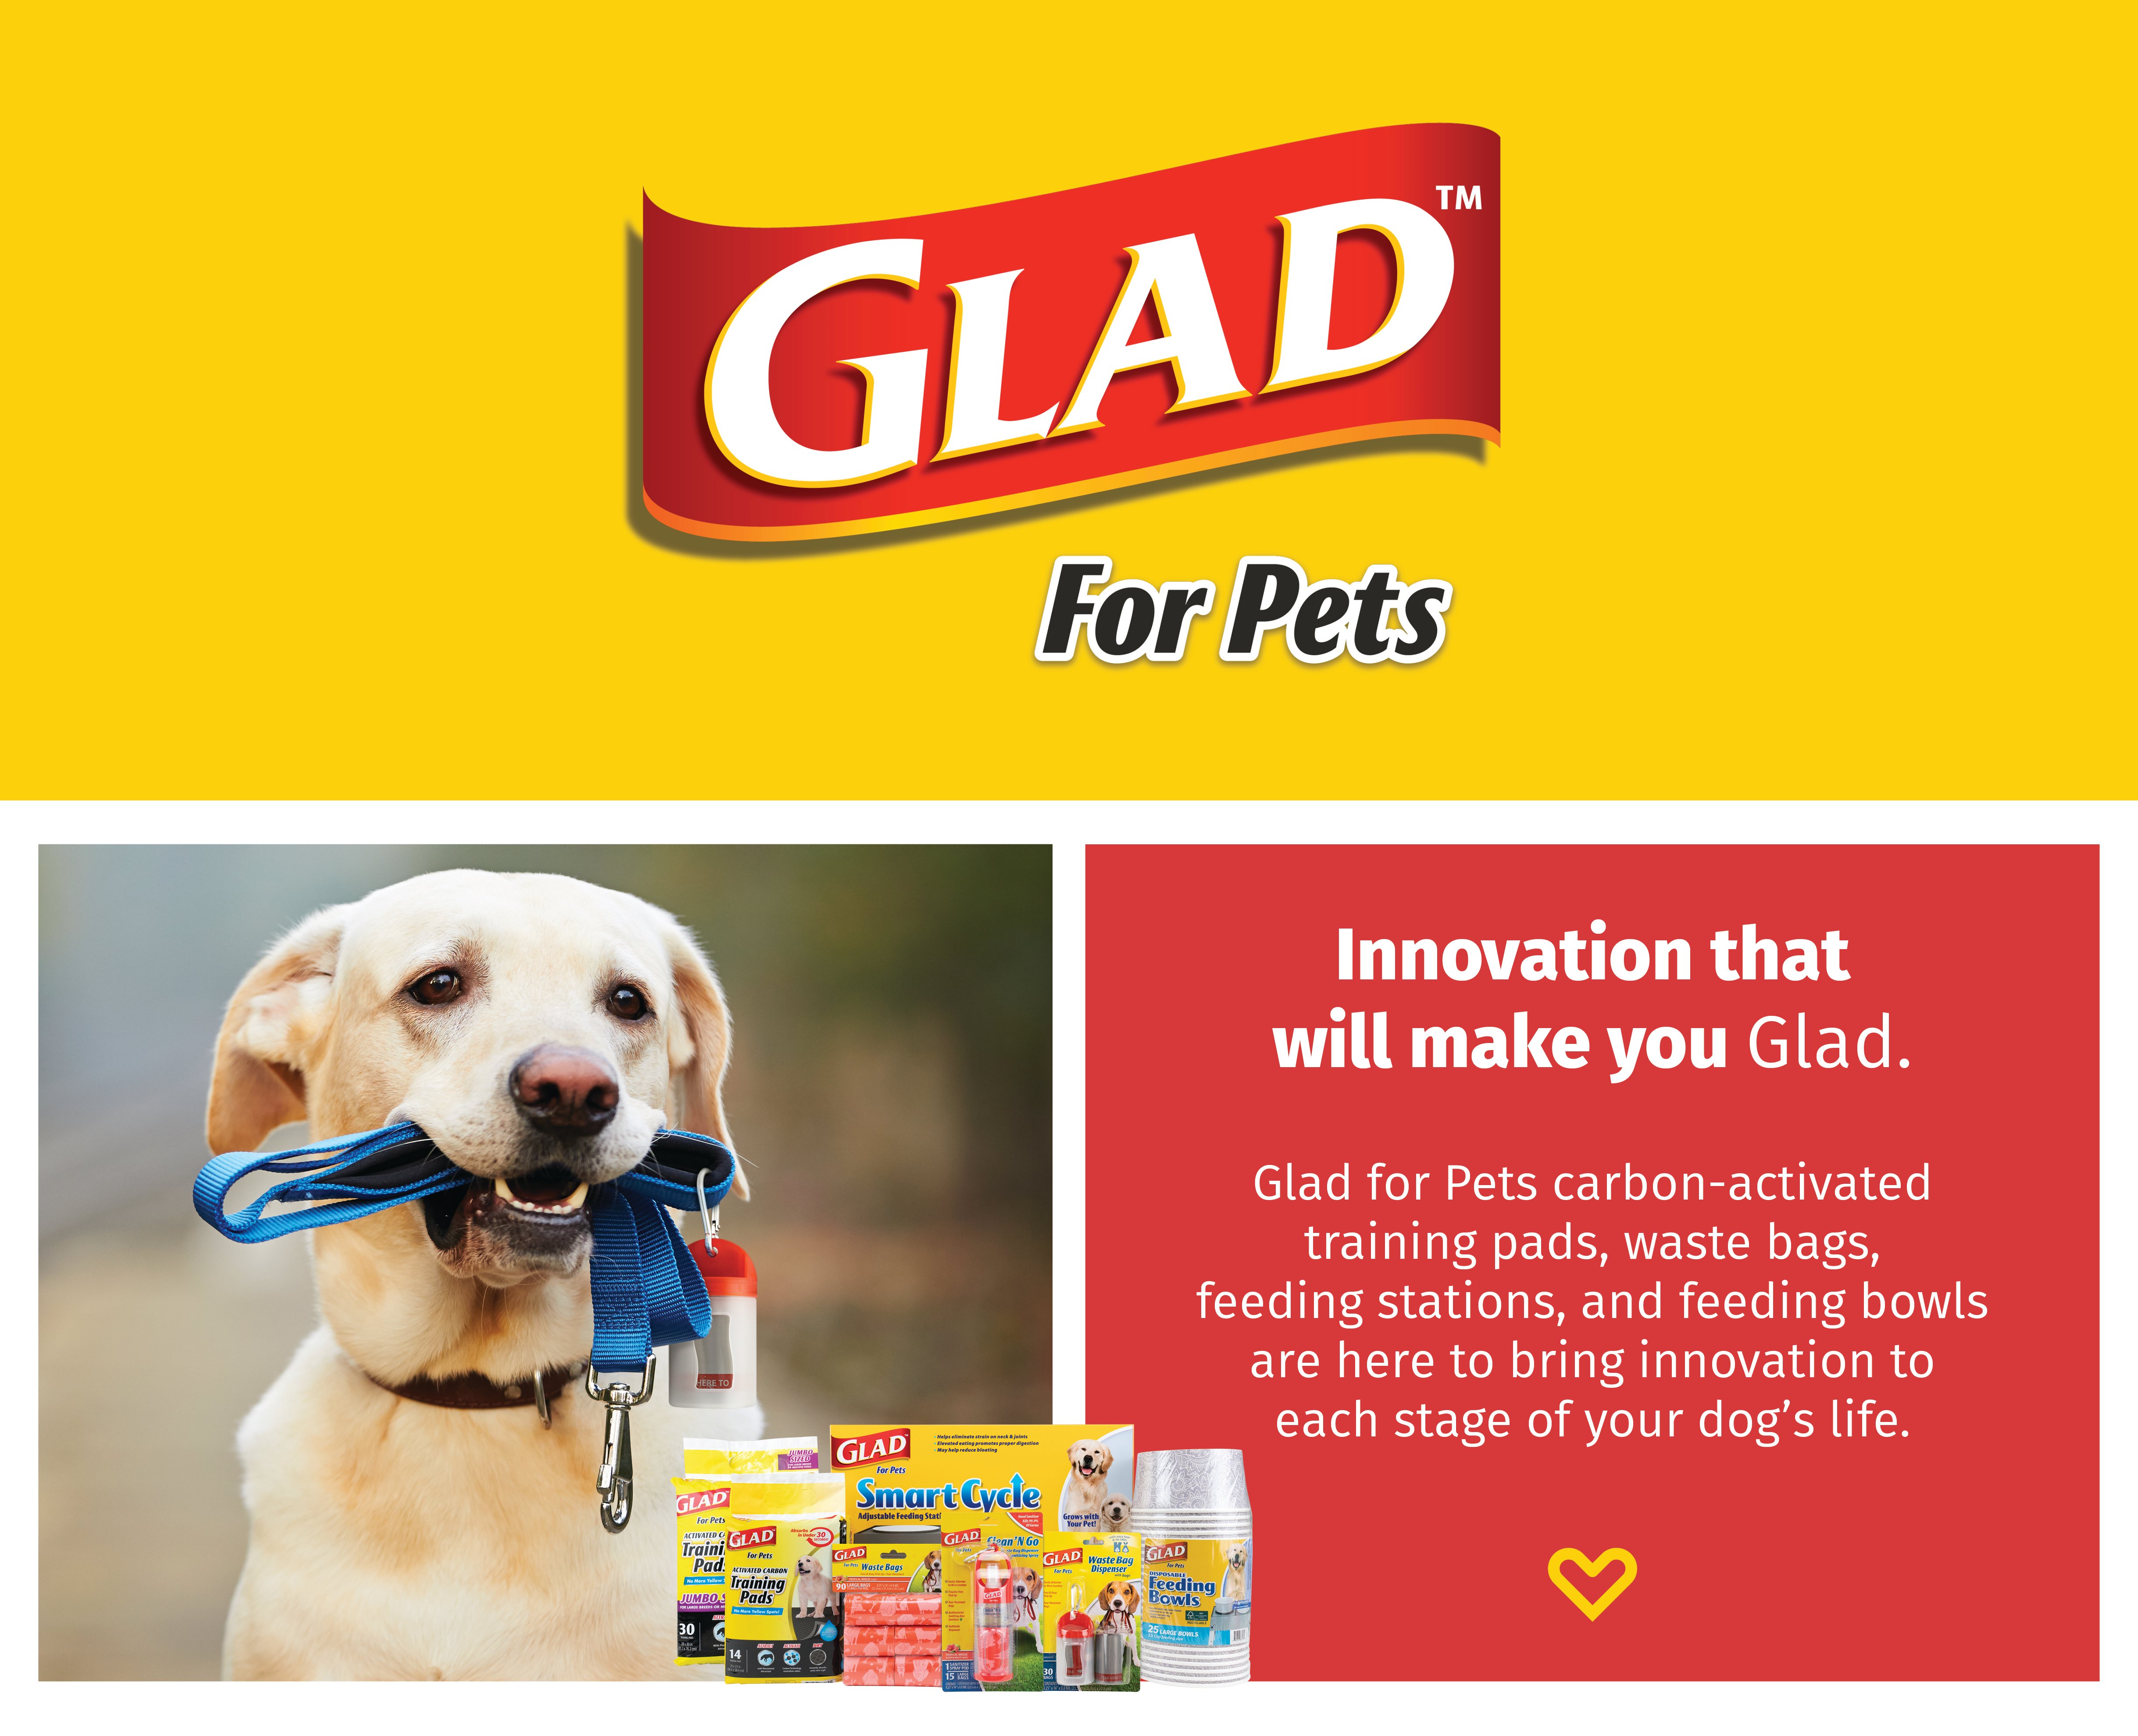 Glad for Pets